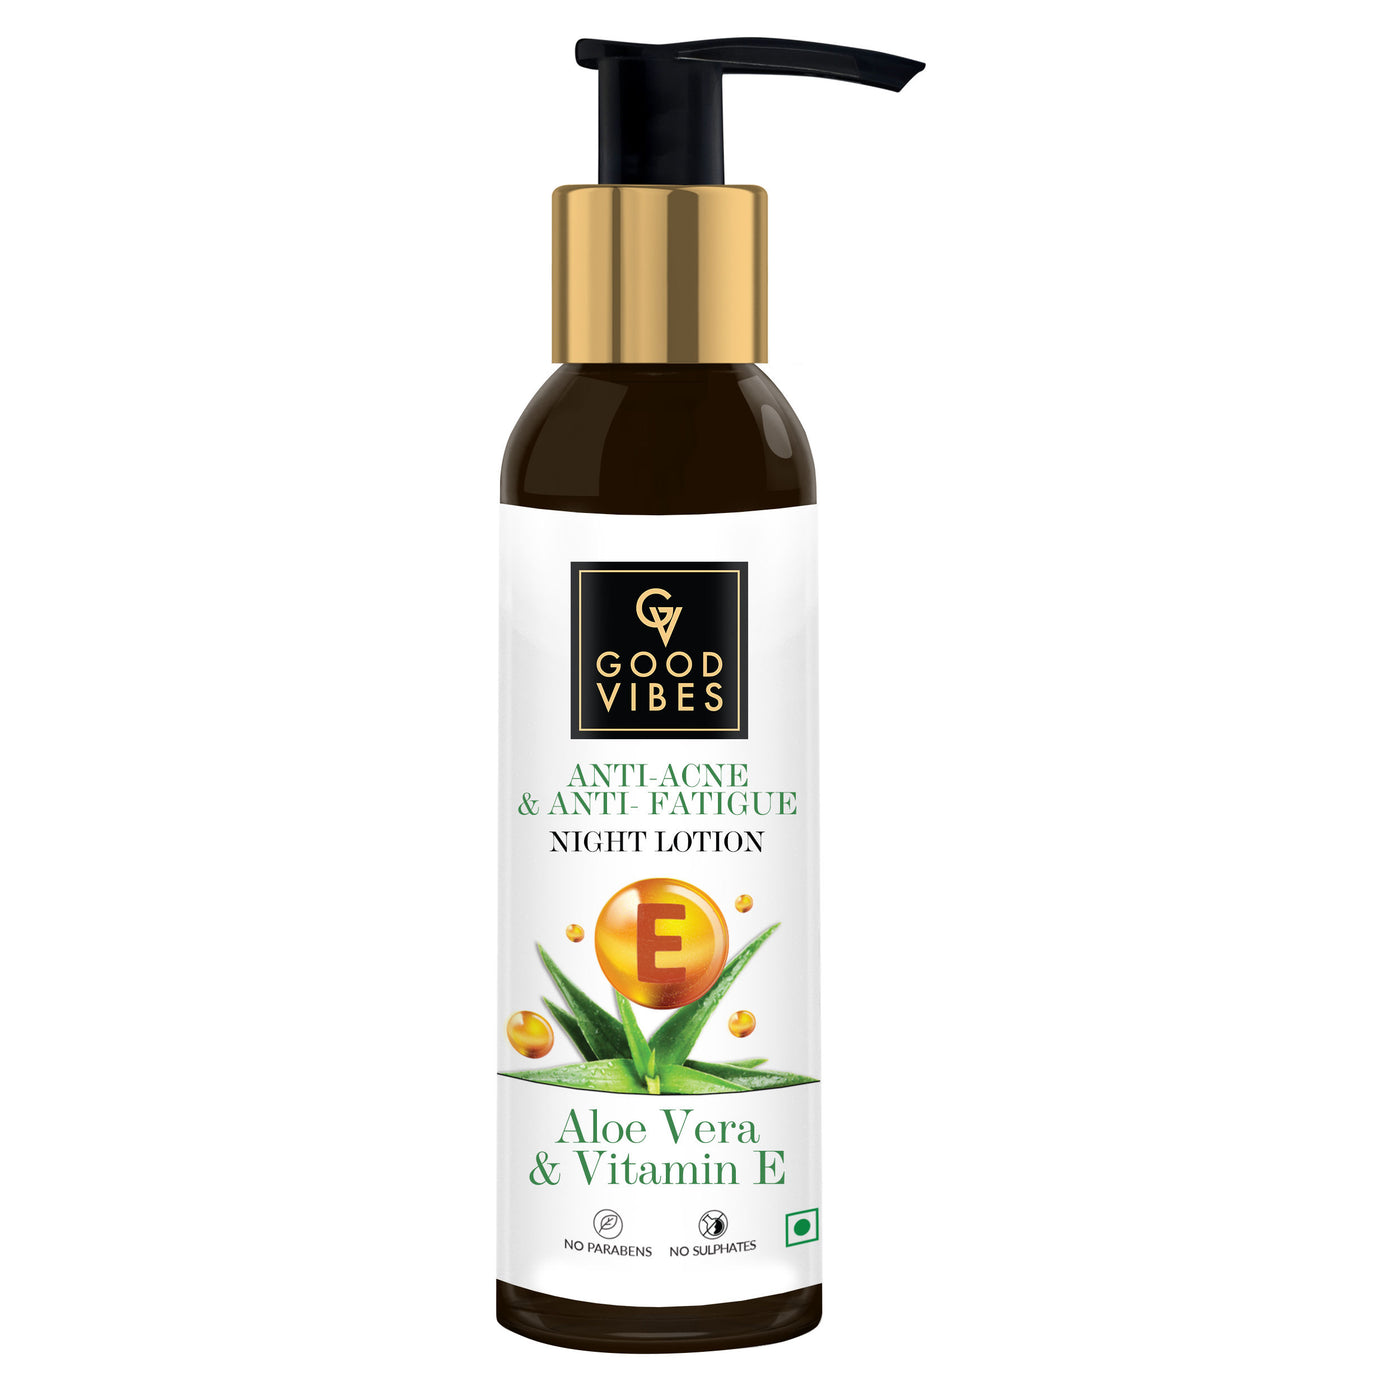 good-vibes-aloe-vera-vitamin-e-anti-acne-night-face-lotion-with-hyaluronic-acid-no-parabens-no-sulphates-no-mineral-oil-120-ml-9